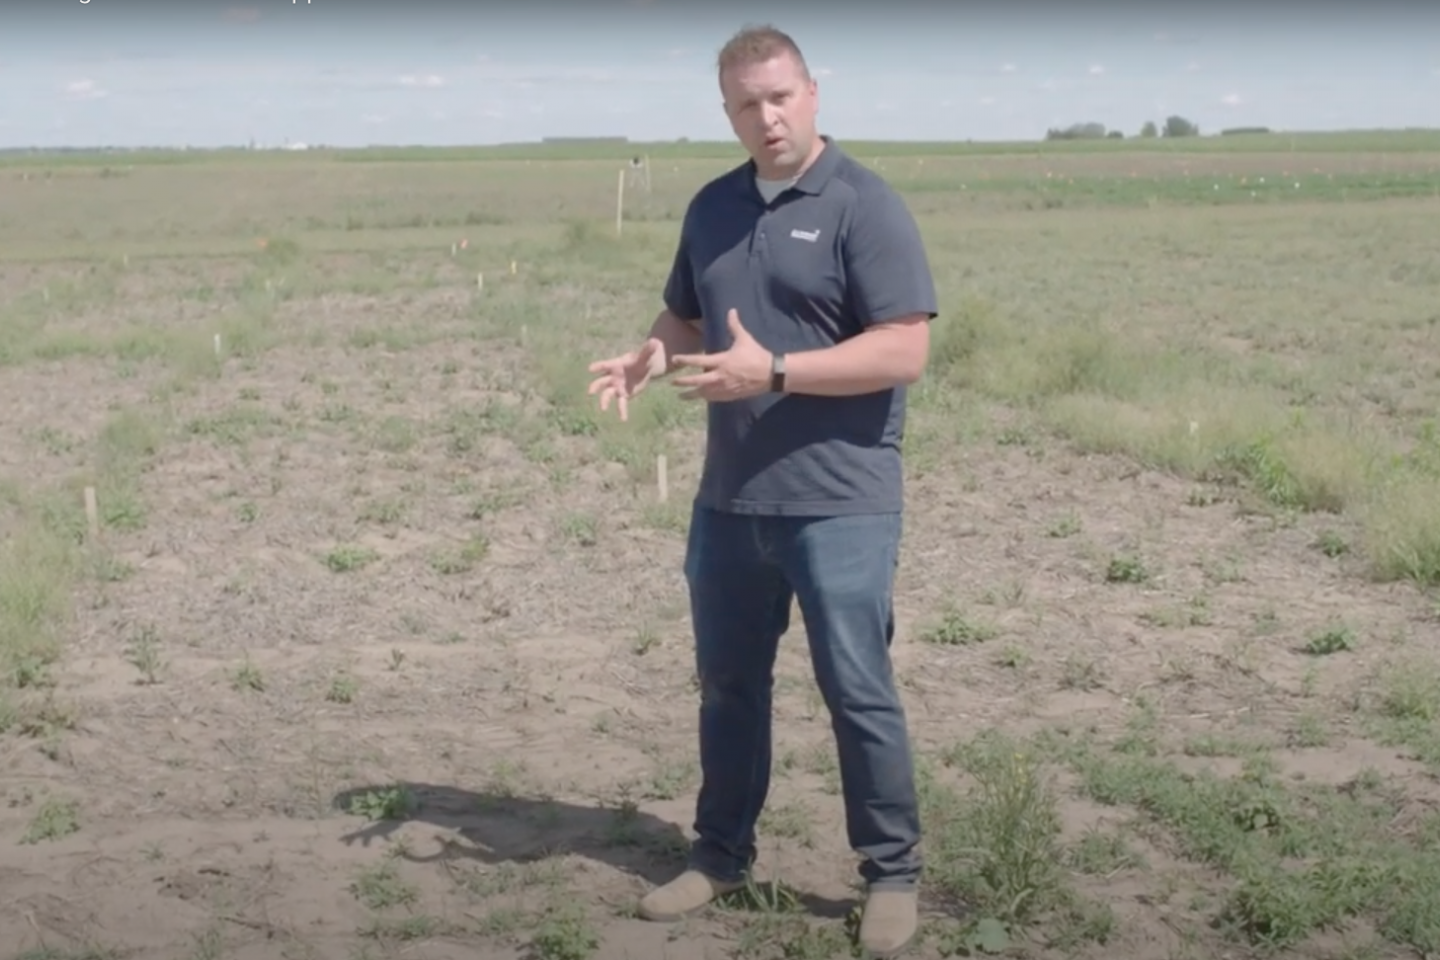 Focus Herbicide has now been registered for fall usage in front of lentils, spring wheat, winter wheat, corn and soybeans. Set yourself up for success in the spring by controlling the nutrient-stealing weeds this fall. Watch FMC Product Manager Jordan Brisebois showcase the plot demo from our research trials in Hanley, SK.